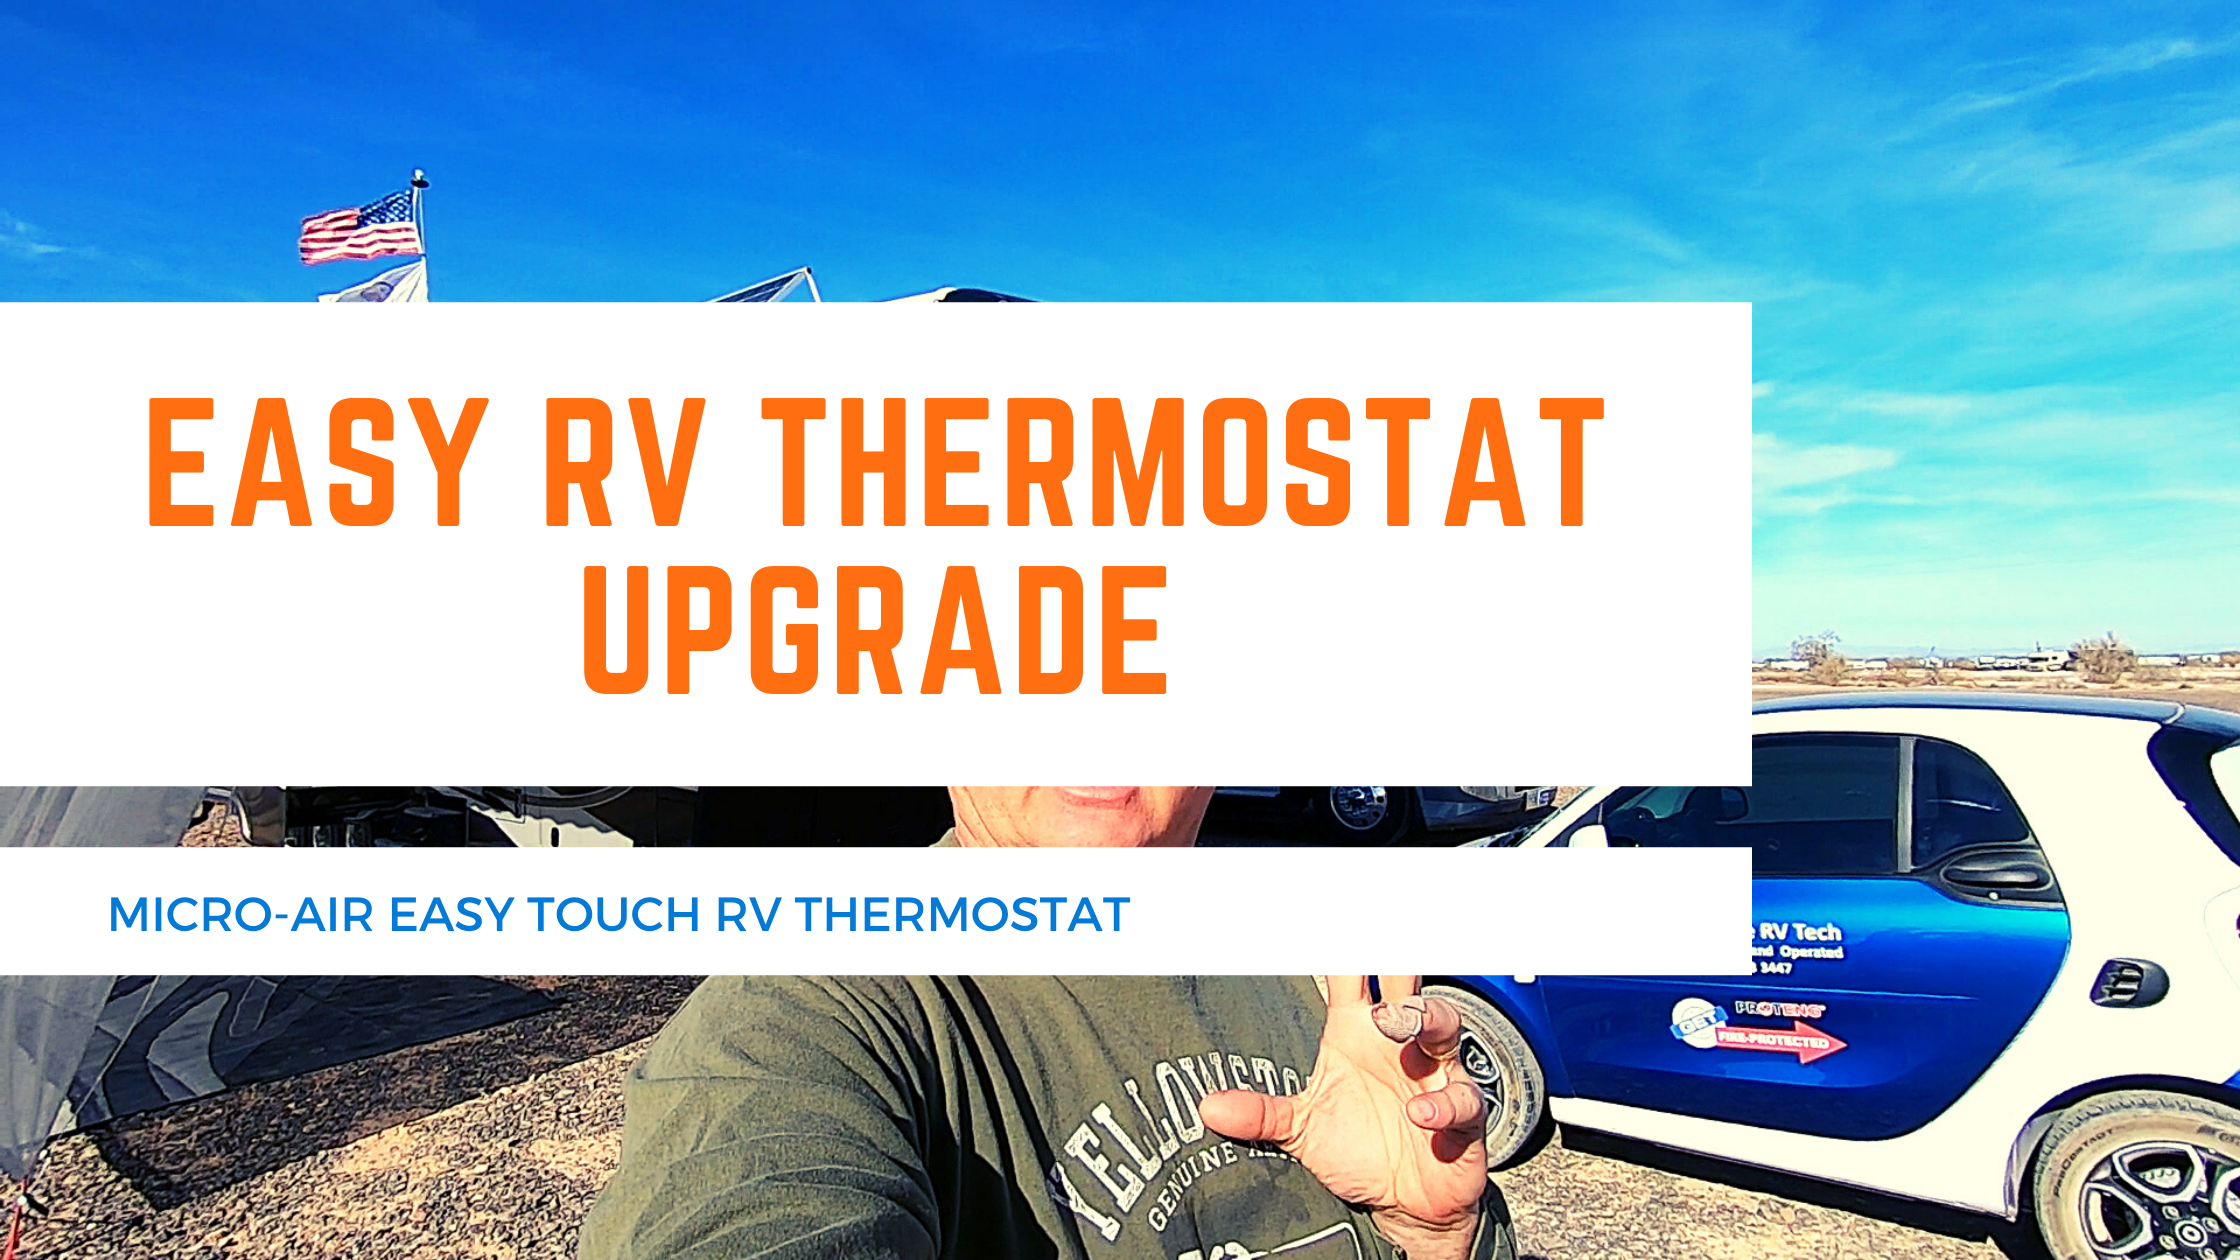  Upgrading to a Micro-Air Easy Touch RV Thermostat